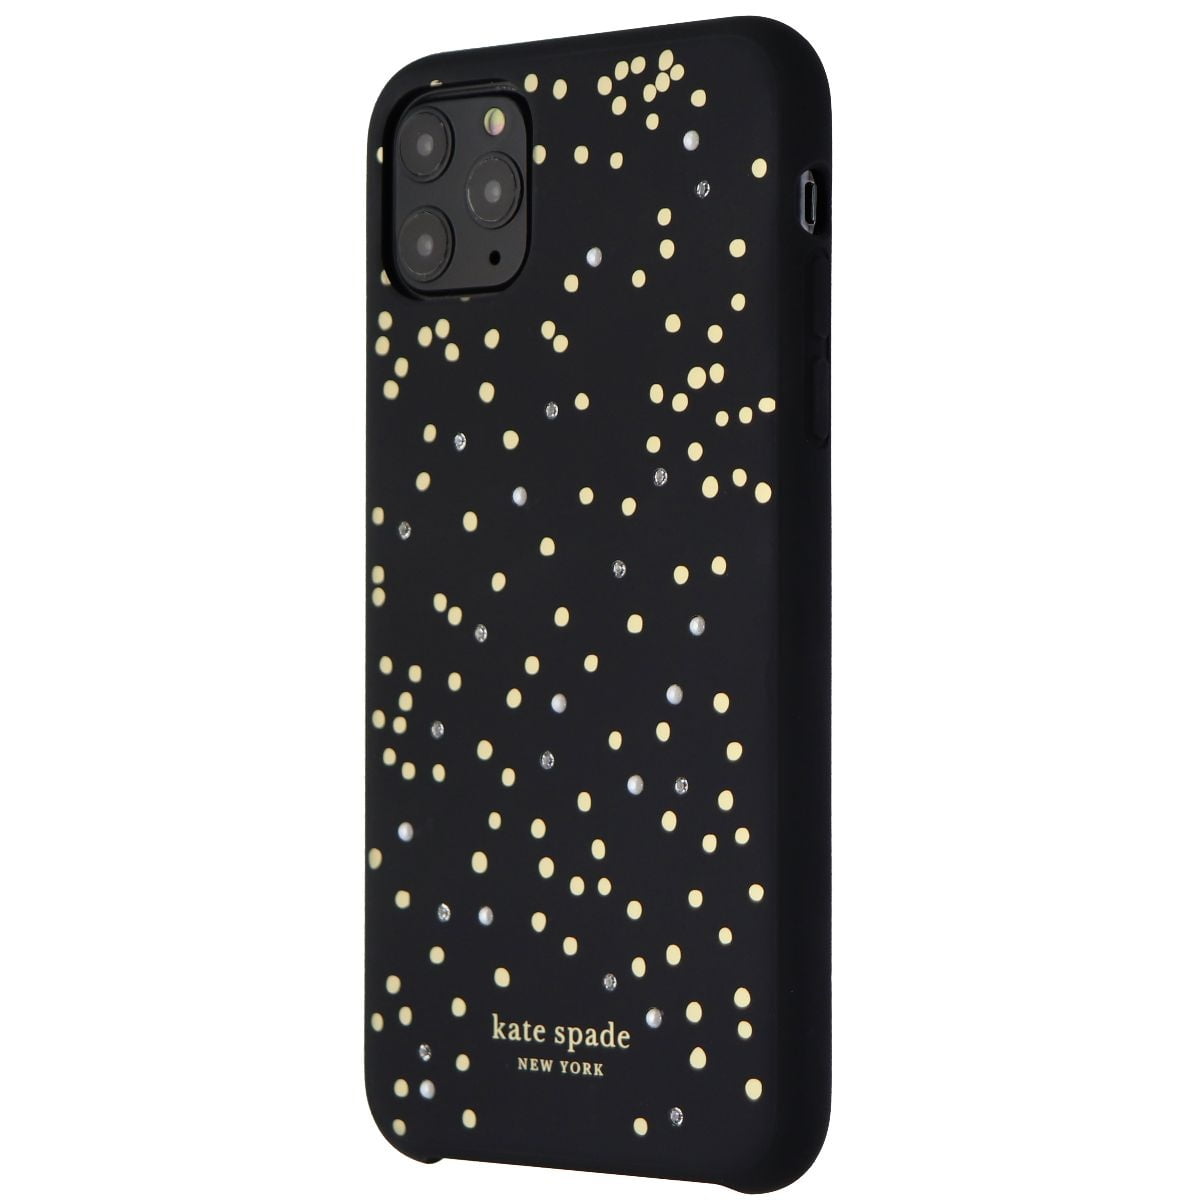 Kate Spade Soft Touch Case for iPhone 11 Pro Max (6.5-inch) Black Disco